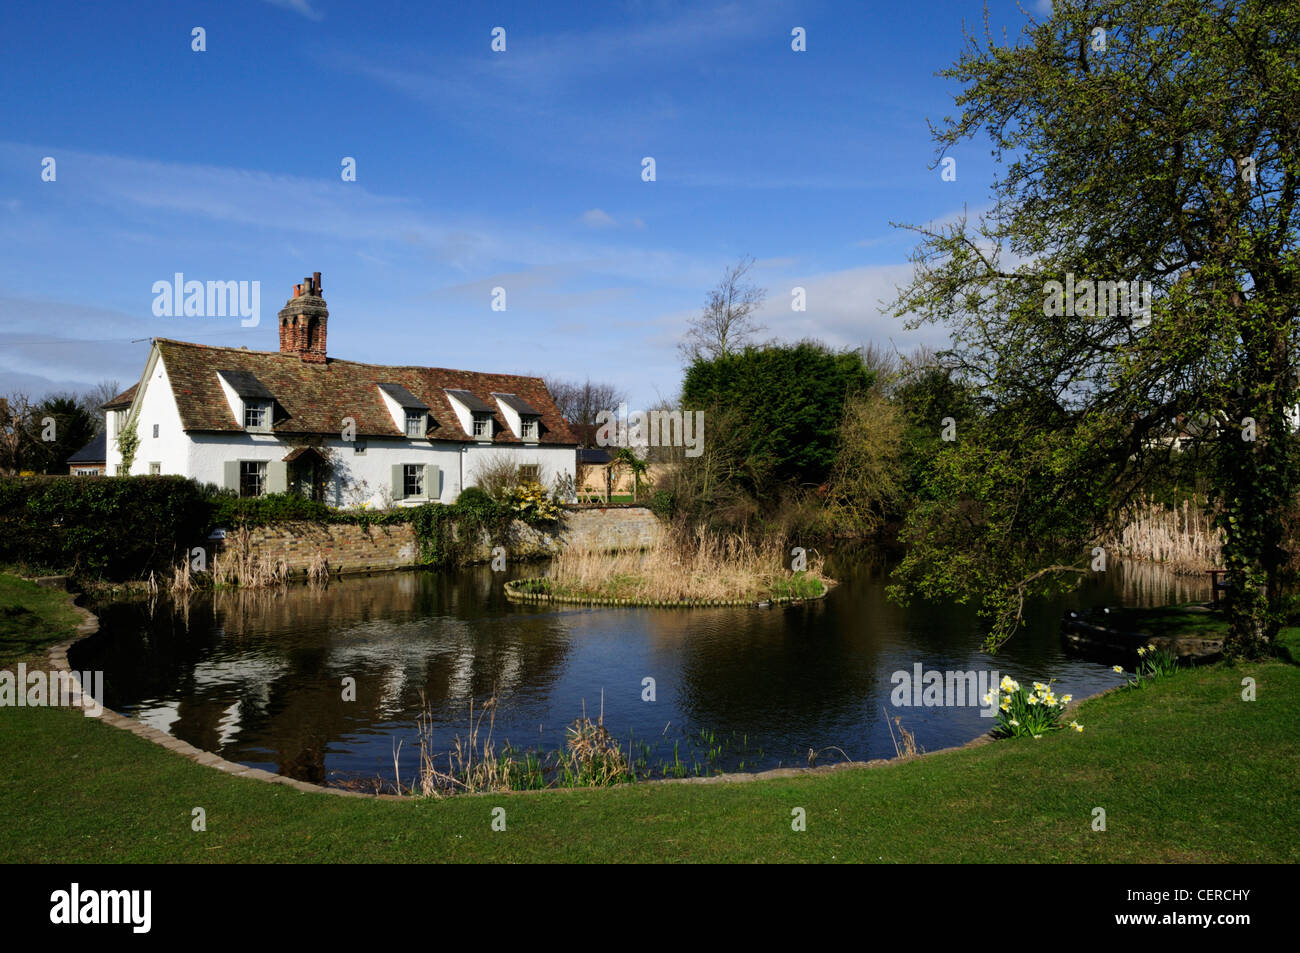 A duckpond in the historic rural village of Comberton. Stock Photo